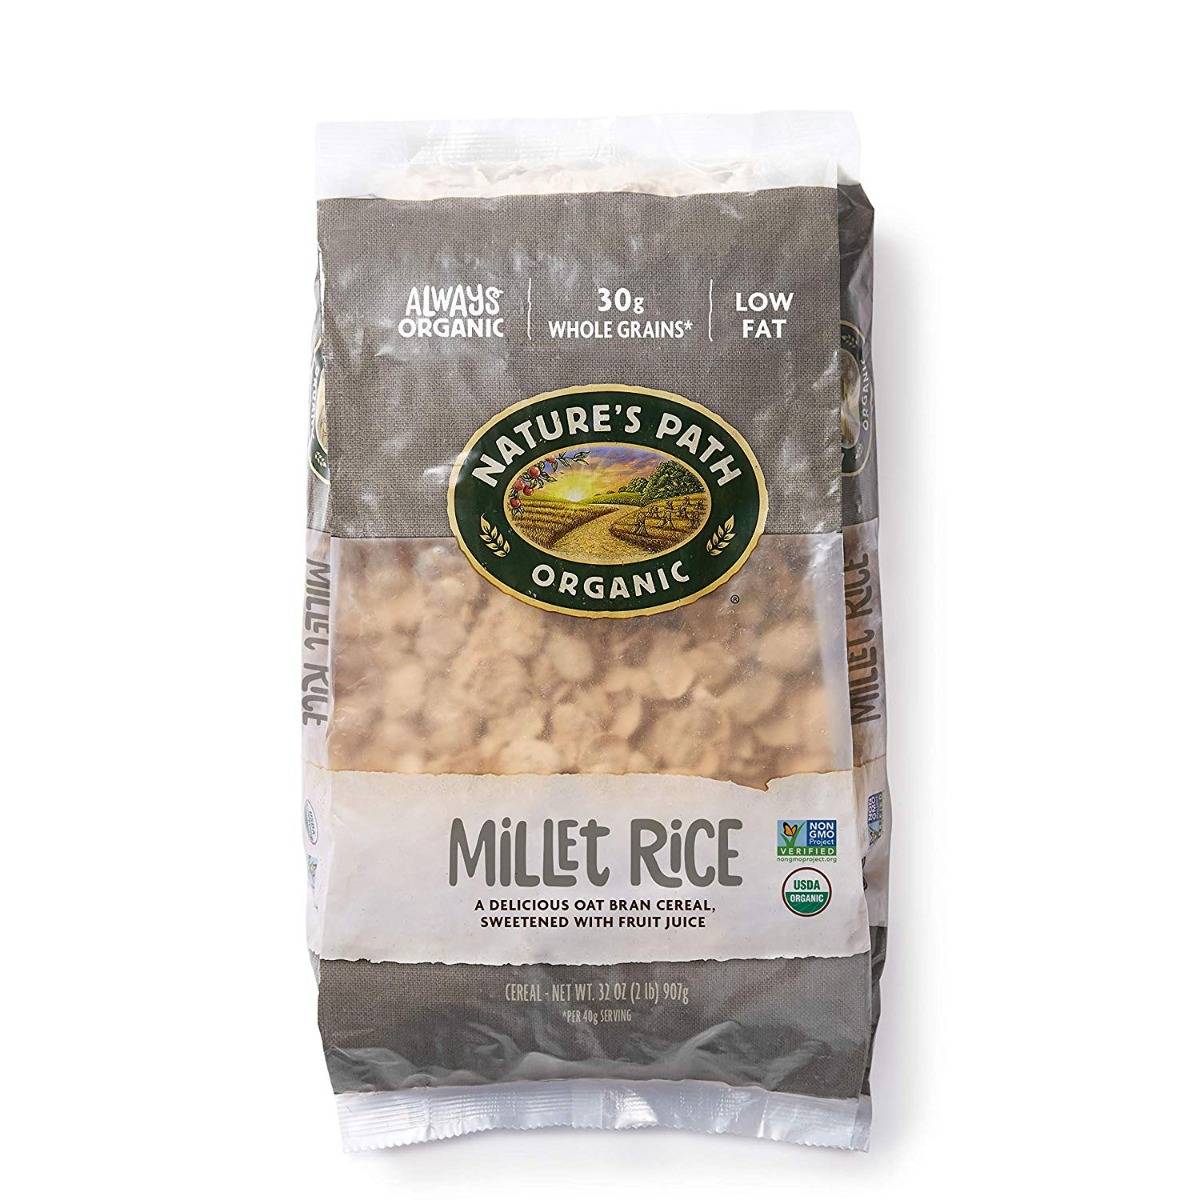 Nature's Path Organic Millet Rice Oat-bran Flakes Cereal - Case Of 6 - 32 Oz. - 058449770084